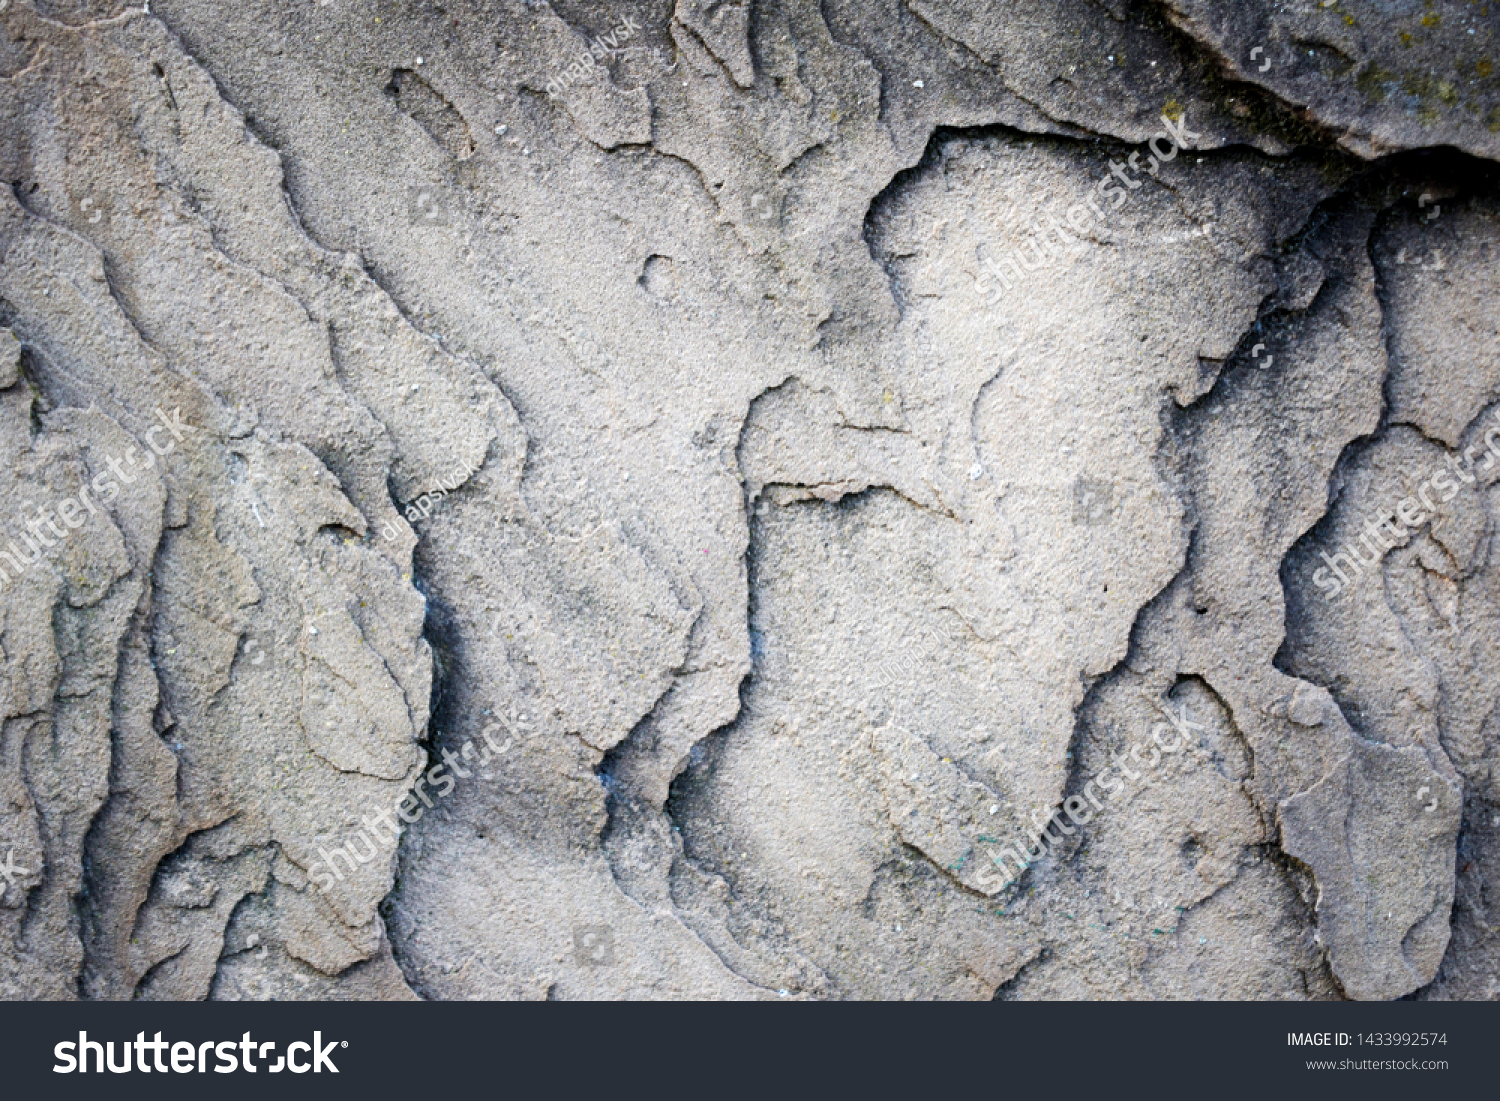 Abstract texture of stone wall of light gray and dark gray colors #1433992574